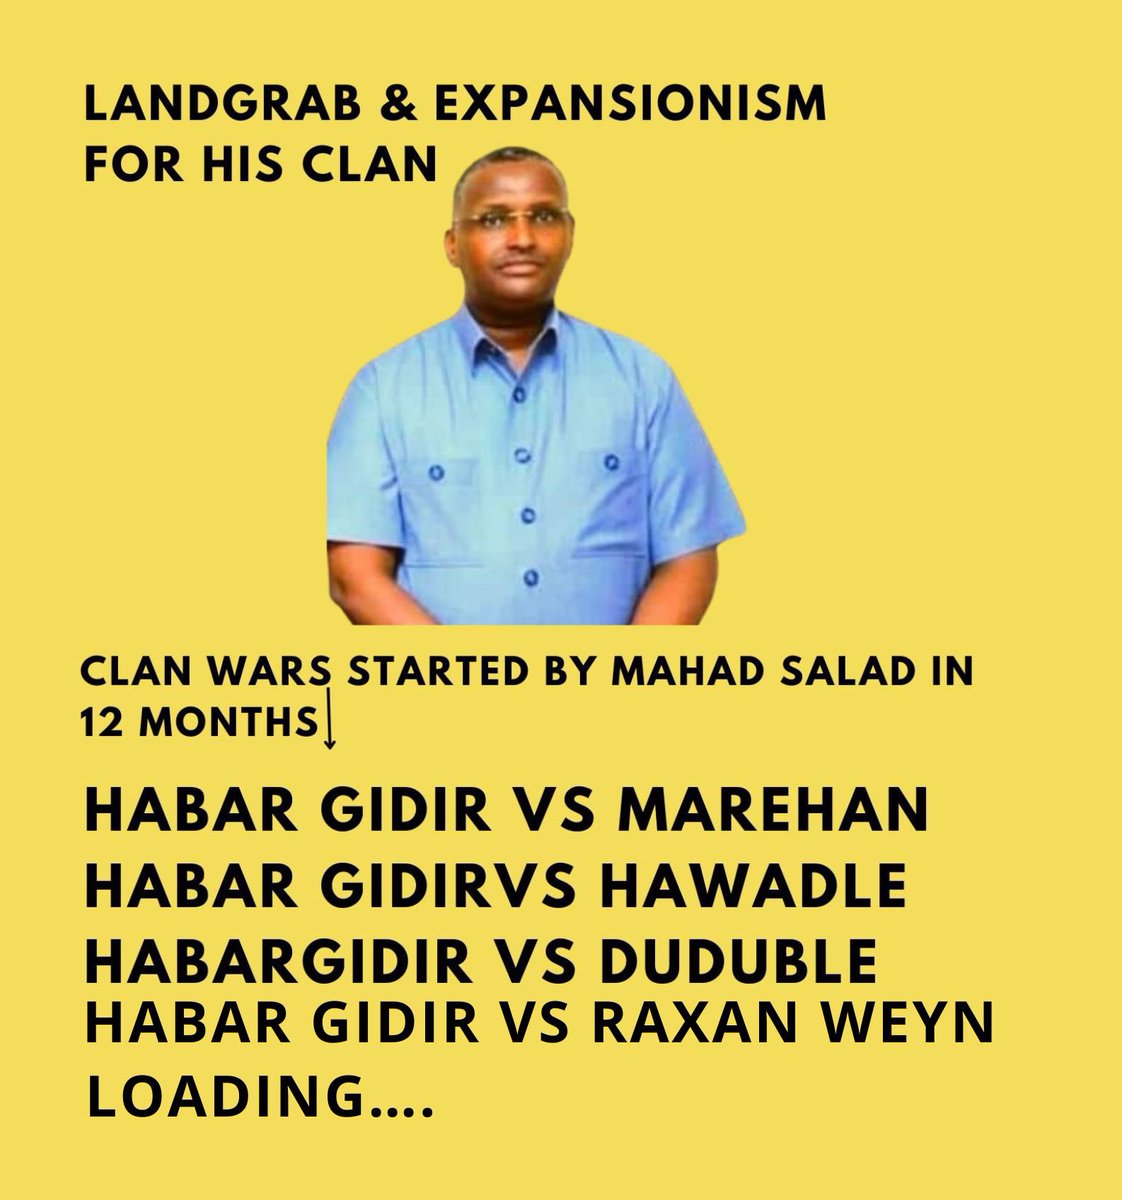 BREAKING NEWS
Since @HSNQ_NISA leader @mahadsalad came to power: He has started 4+ clan wars trough his clan Habar Gidir & the SNA military. The aim is landgrab and expansionism. God save #Somalia